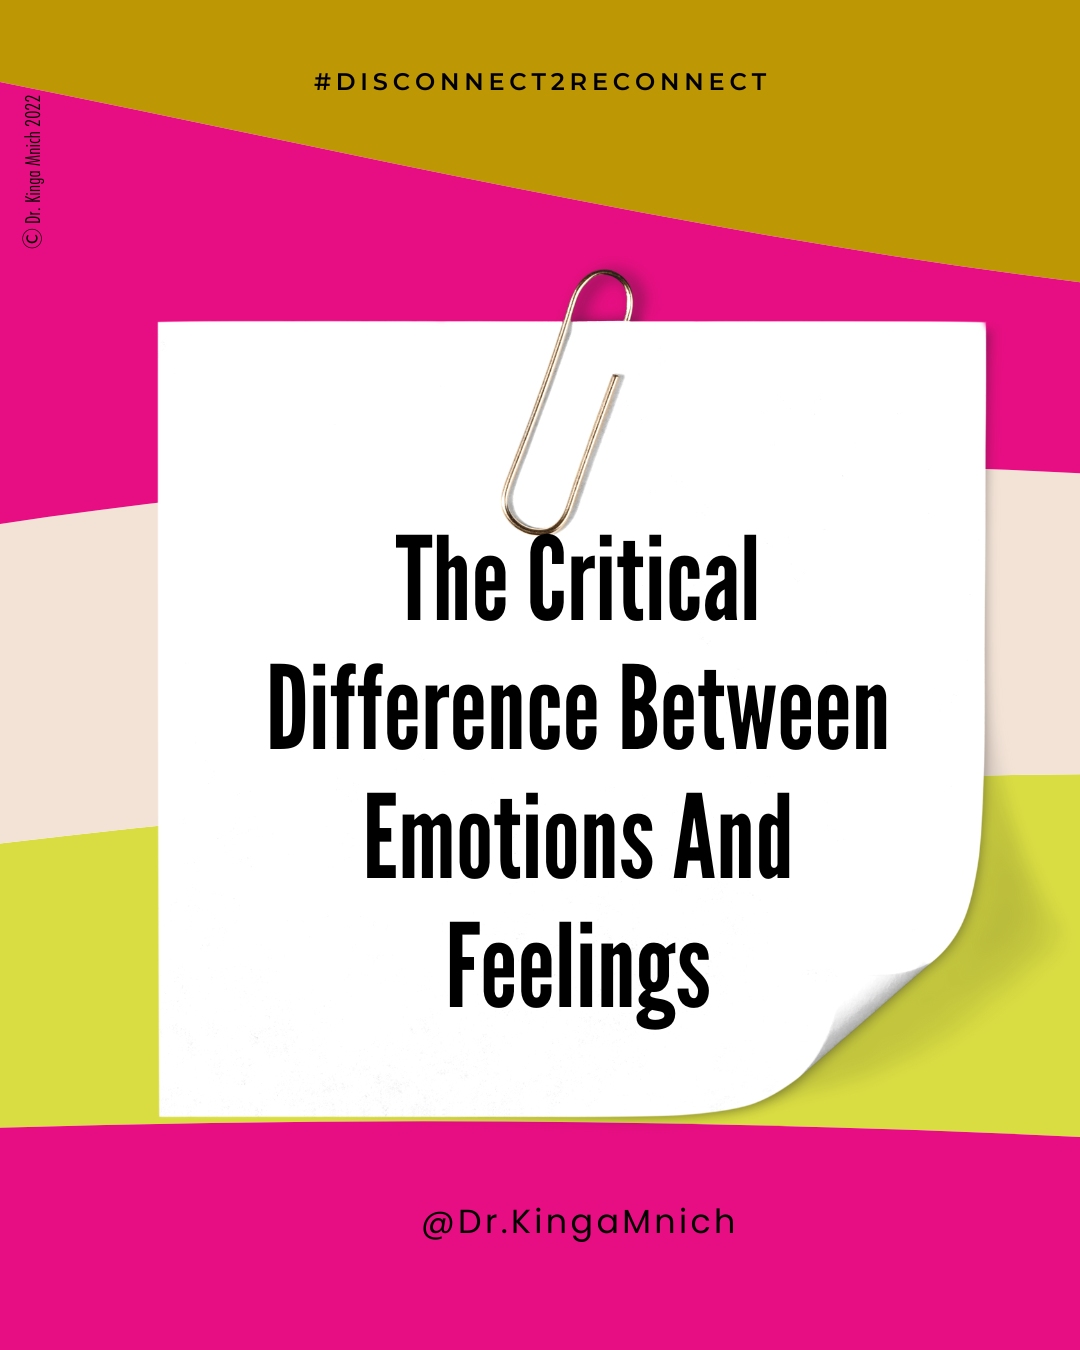 The difference between emotions and feelings